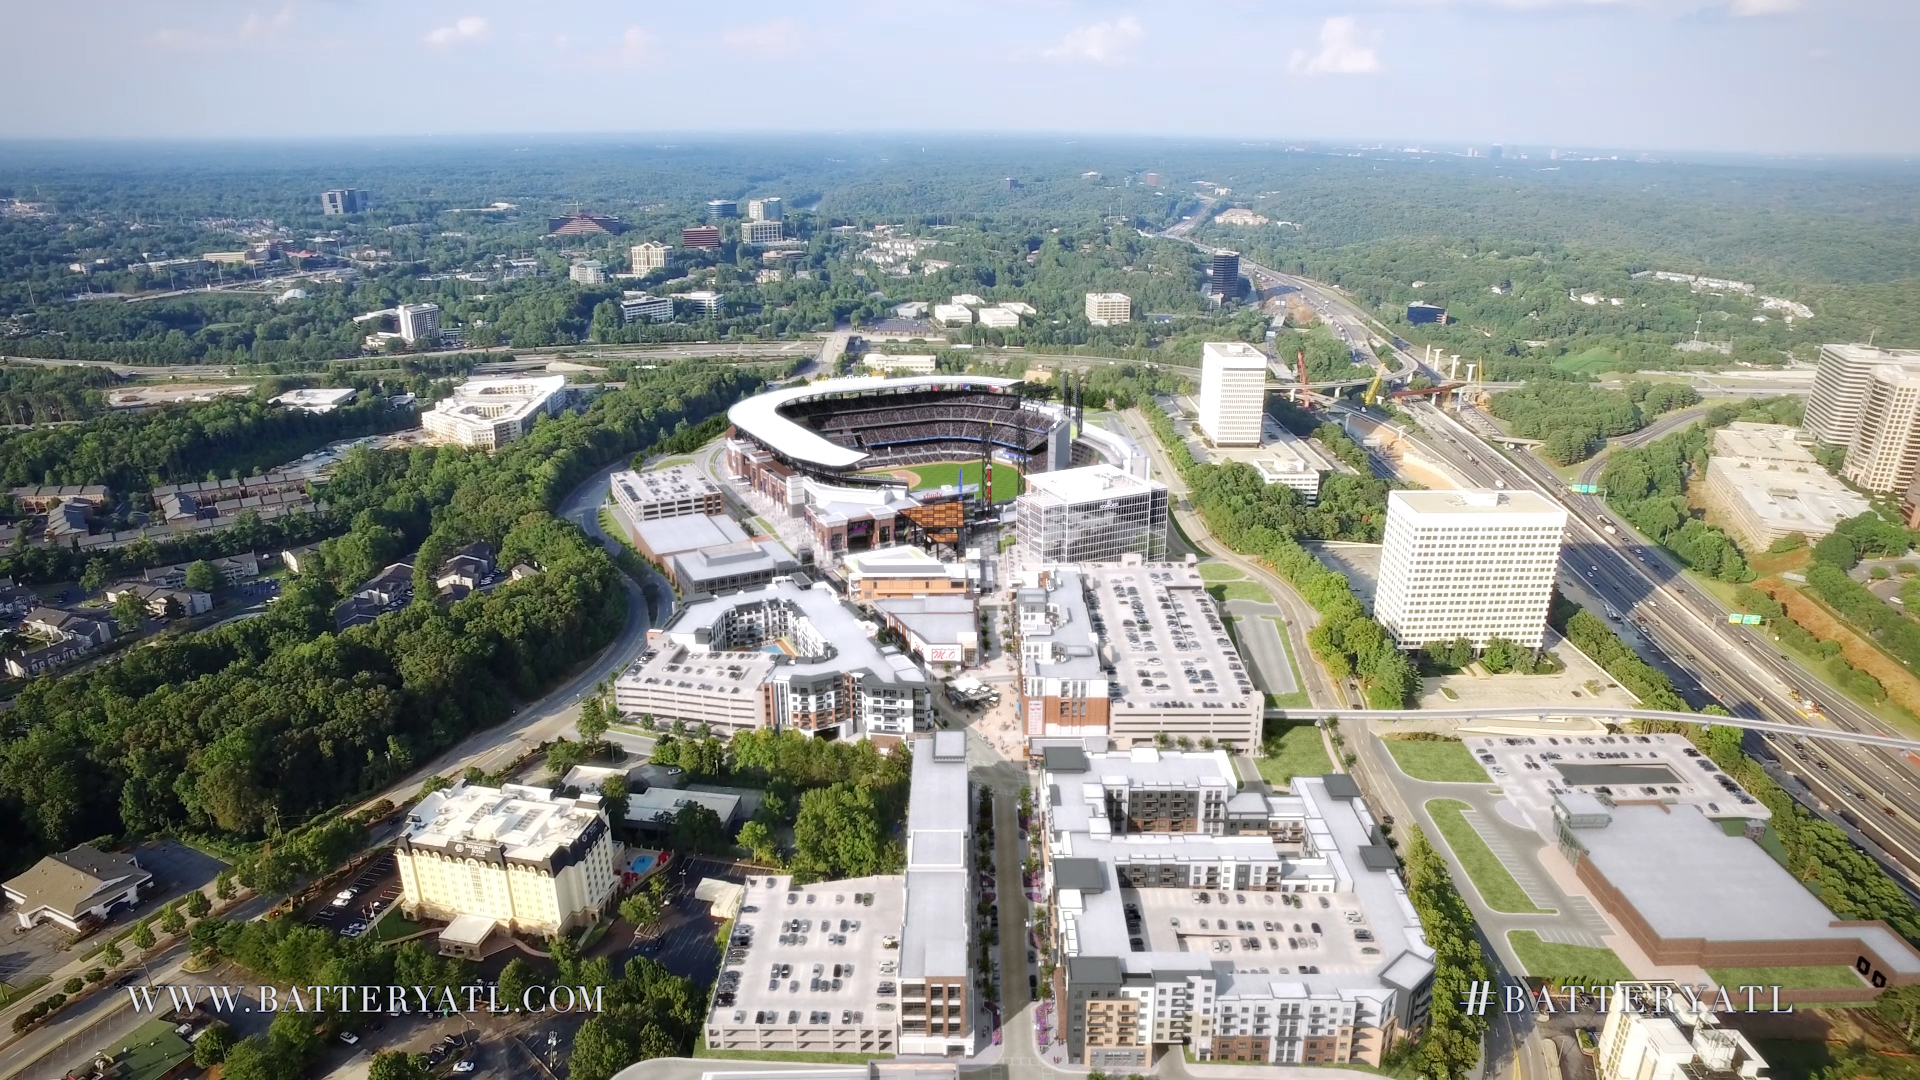 First look: Project rises next to Atlanta Braves stadium, The